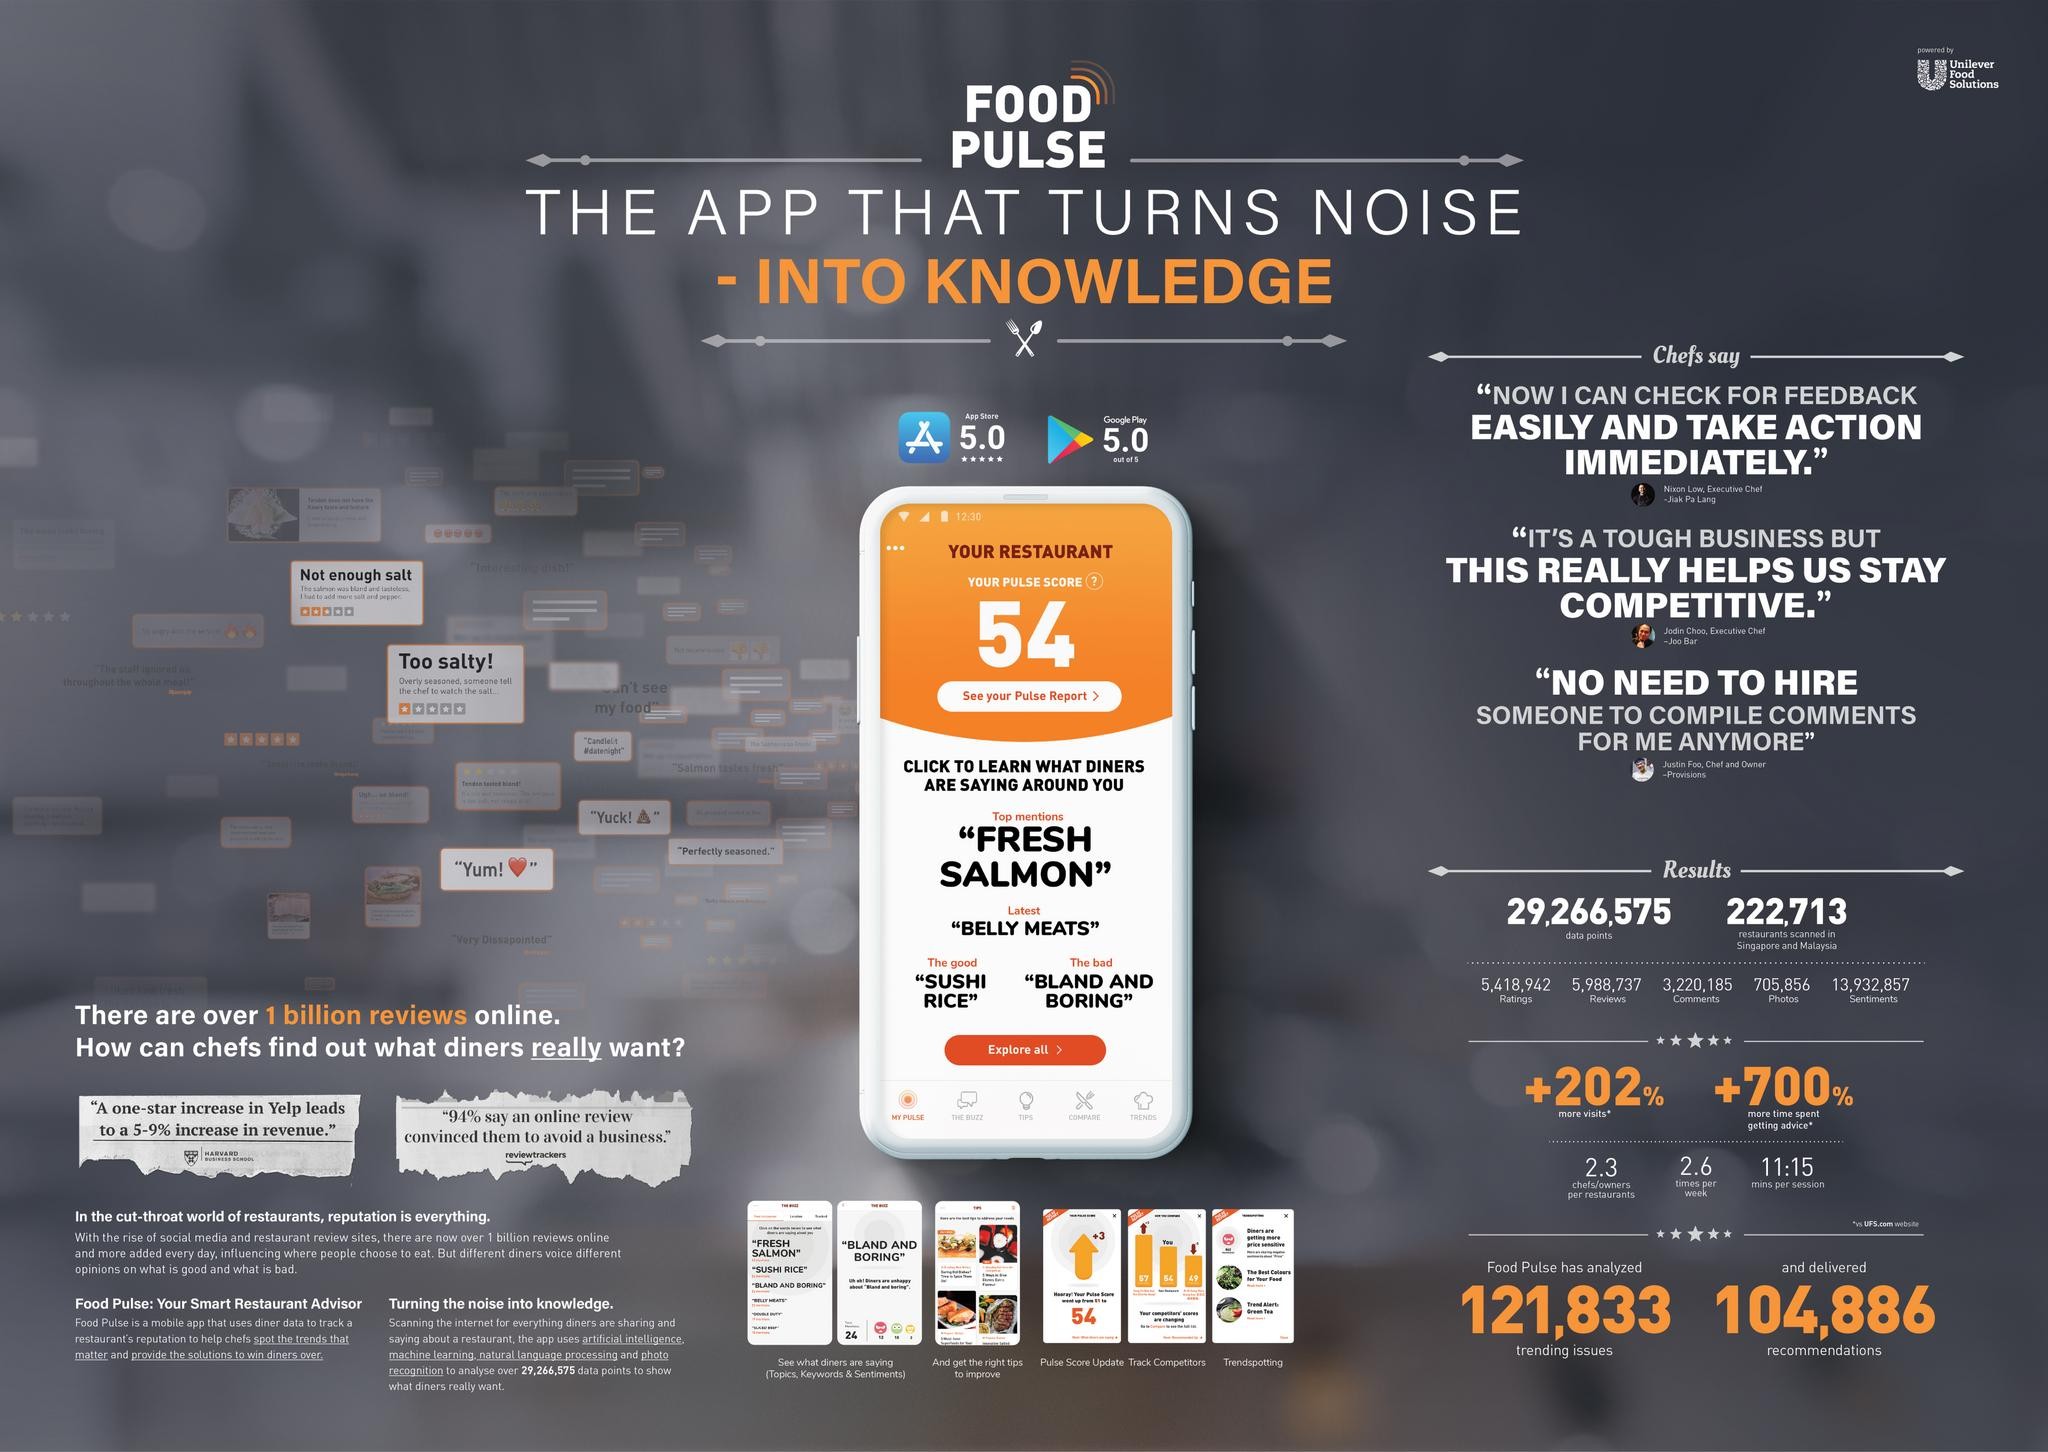 Food Pulse - The app that turns noise into knowledge